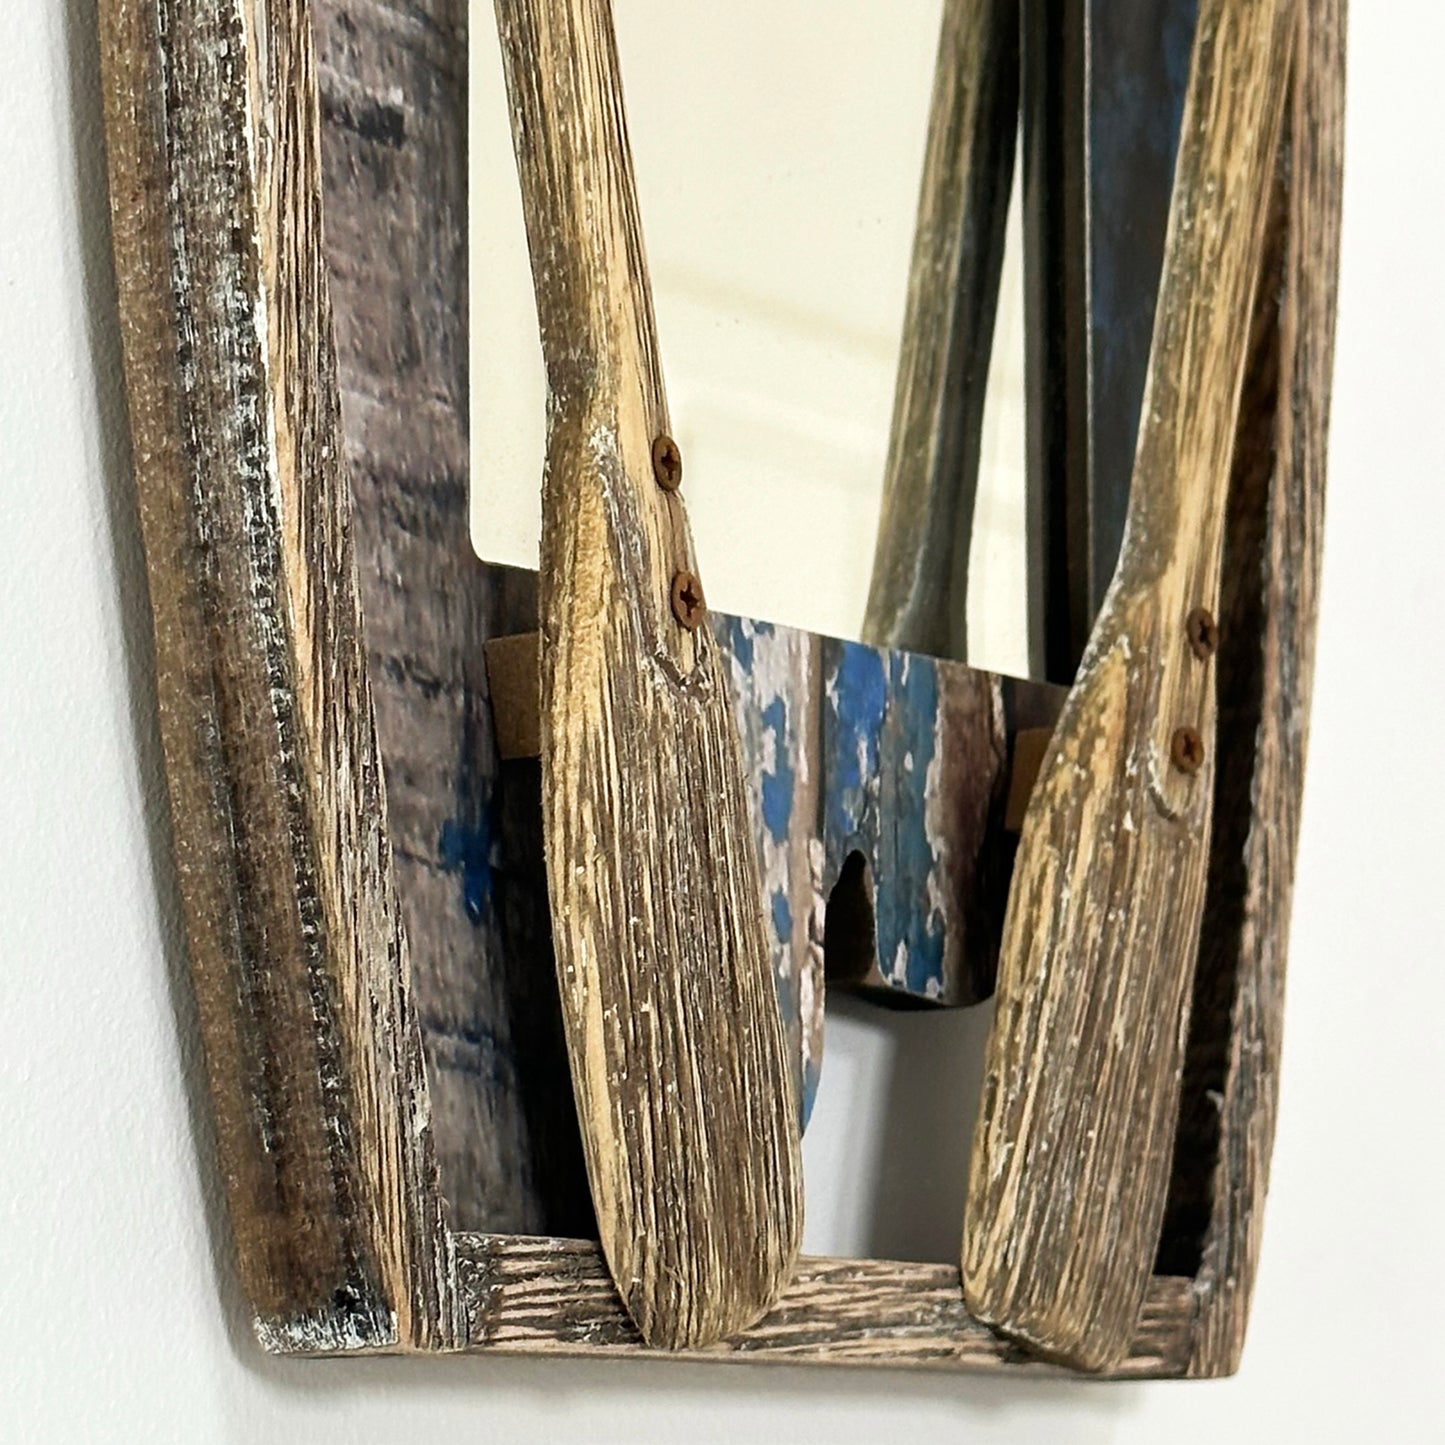 Rustic Paddle Boat Wall Mirror